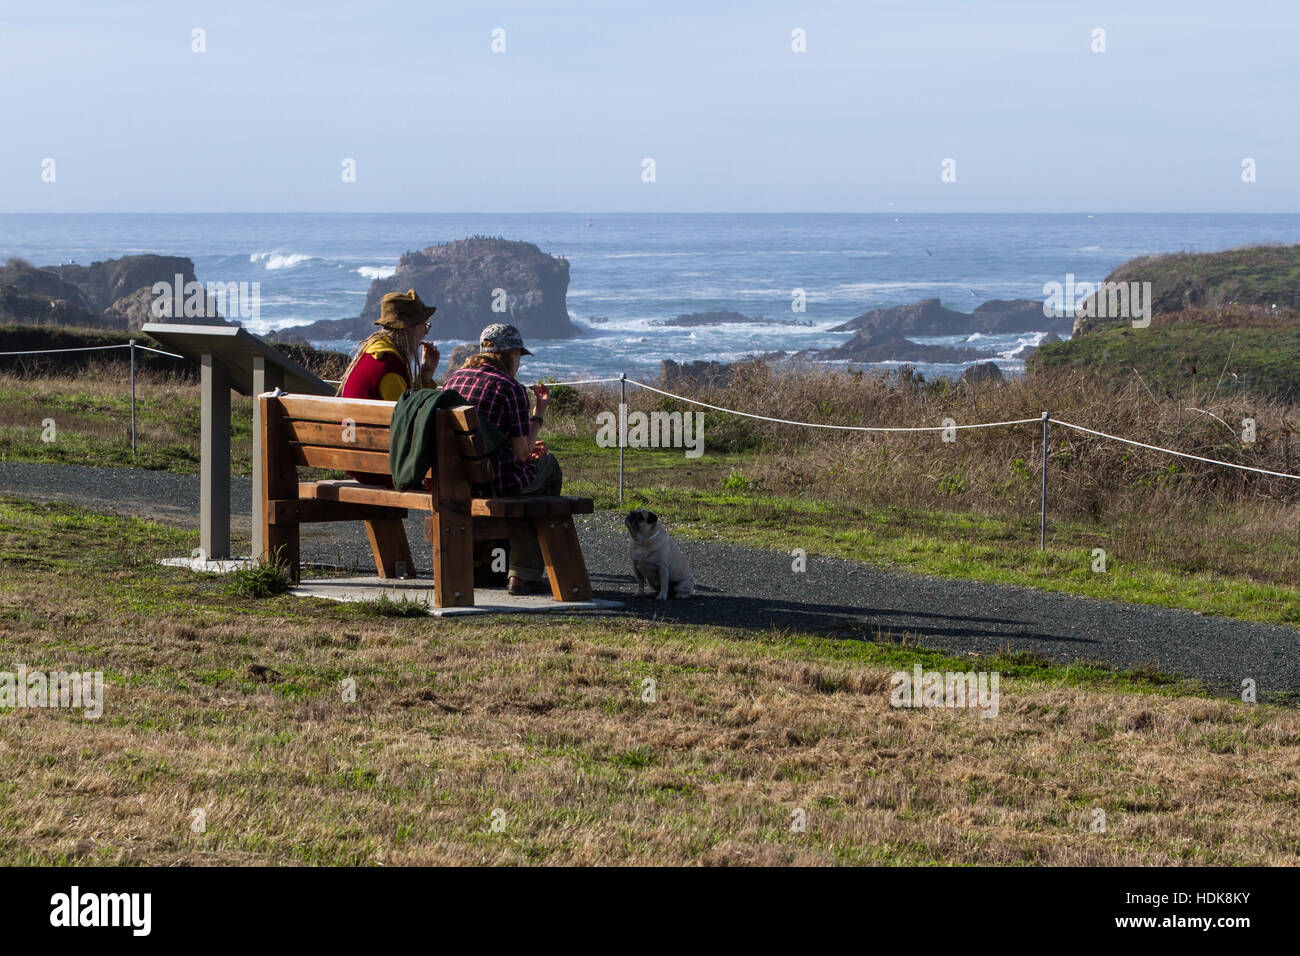 Fort Bragg, California - November 03: Couple having a snack with a coastal view in the background and a small puppy begging for food. November 03 2016 Stock Photo